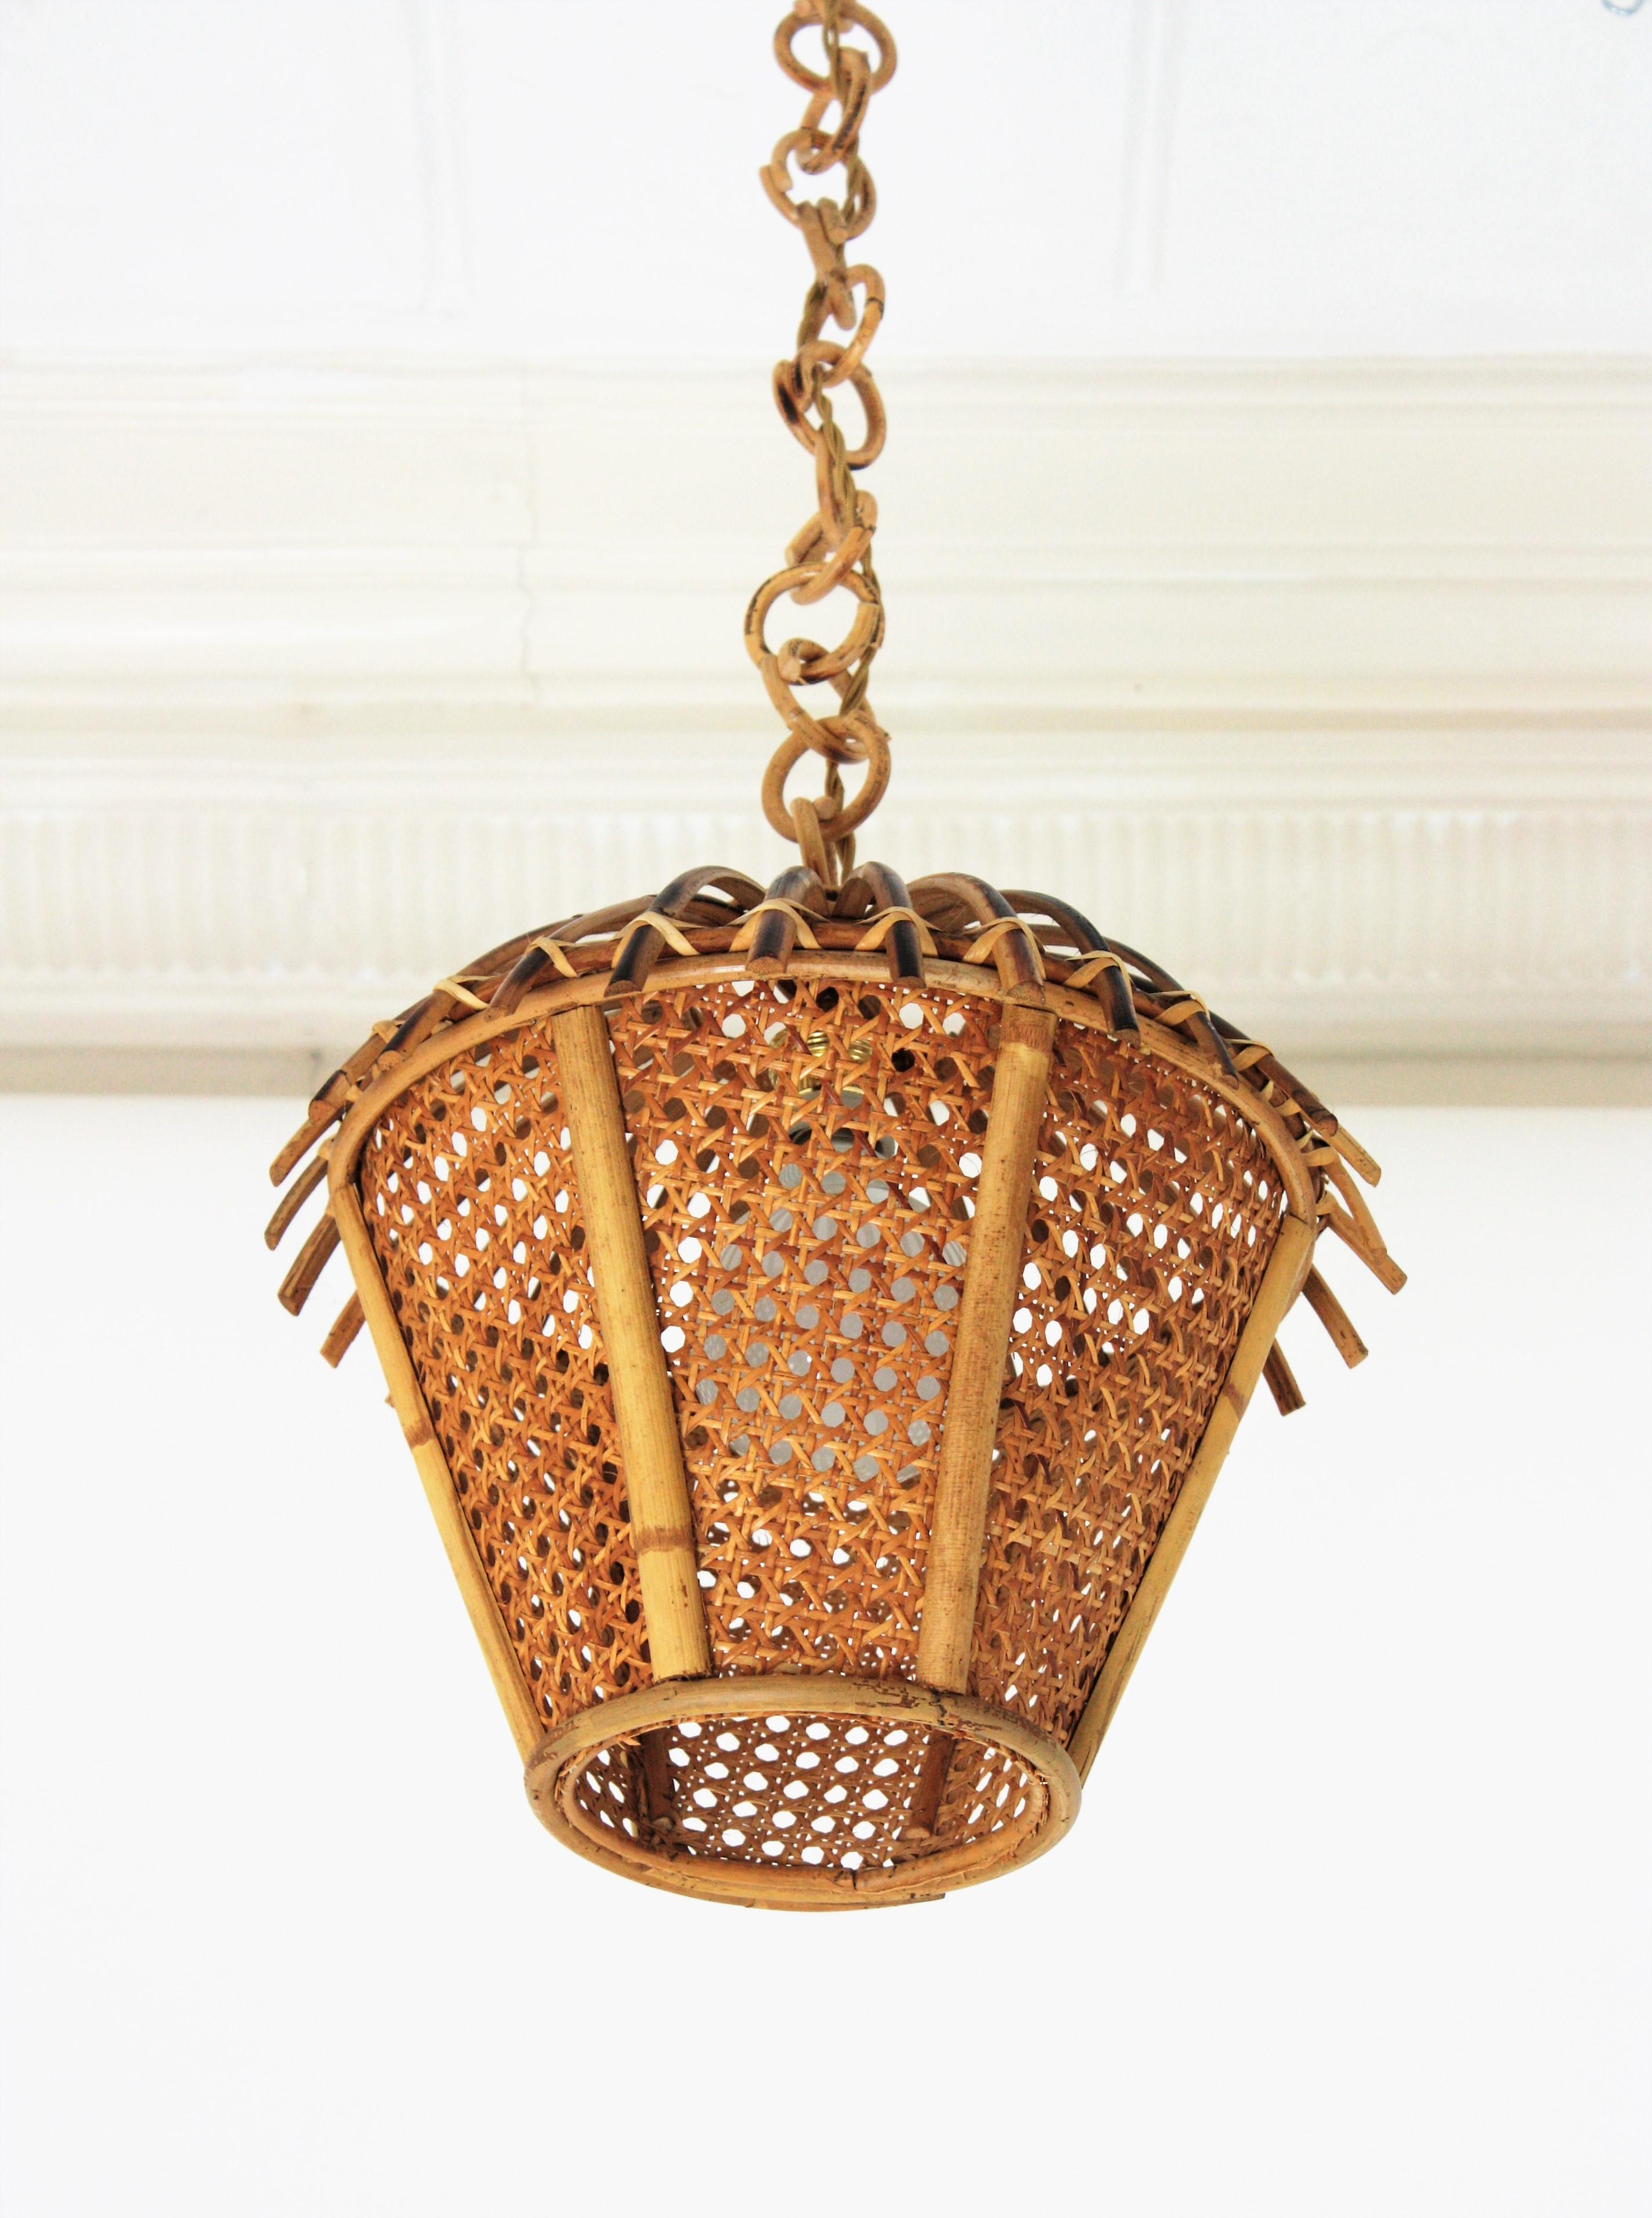 Mid-Century Modern Italian Modernist Rattan and Wicker Wire Pagoda Pendant Hanging Light, 1960s For Sale